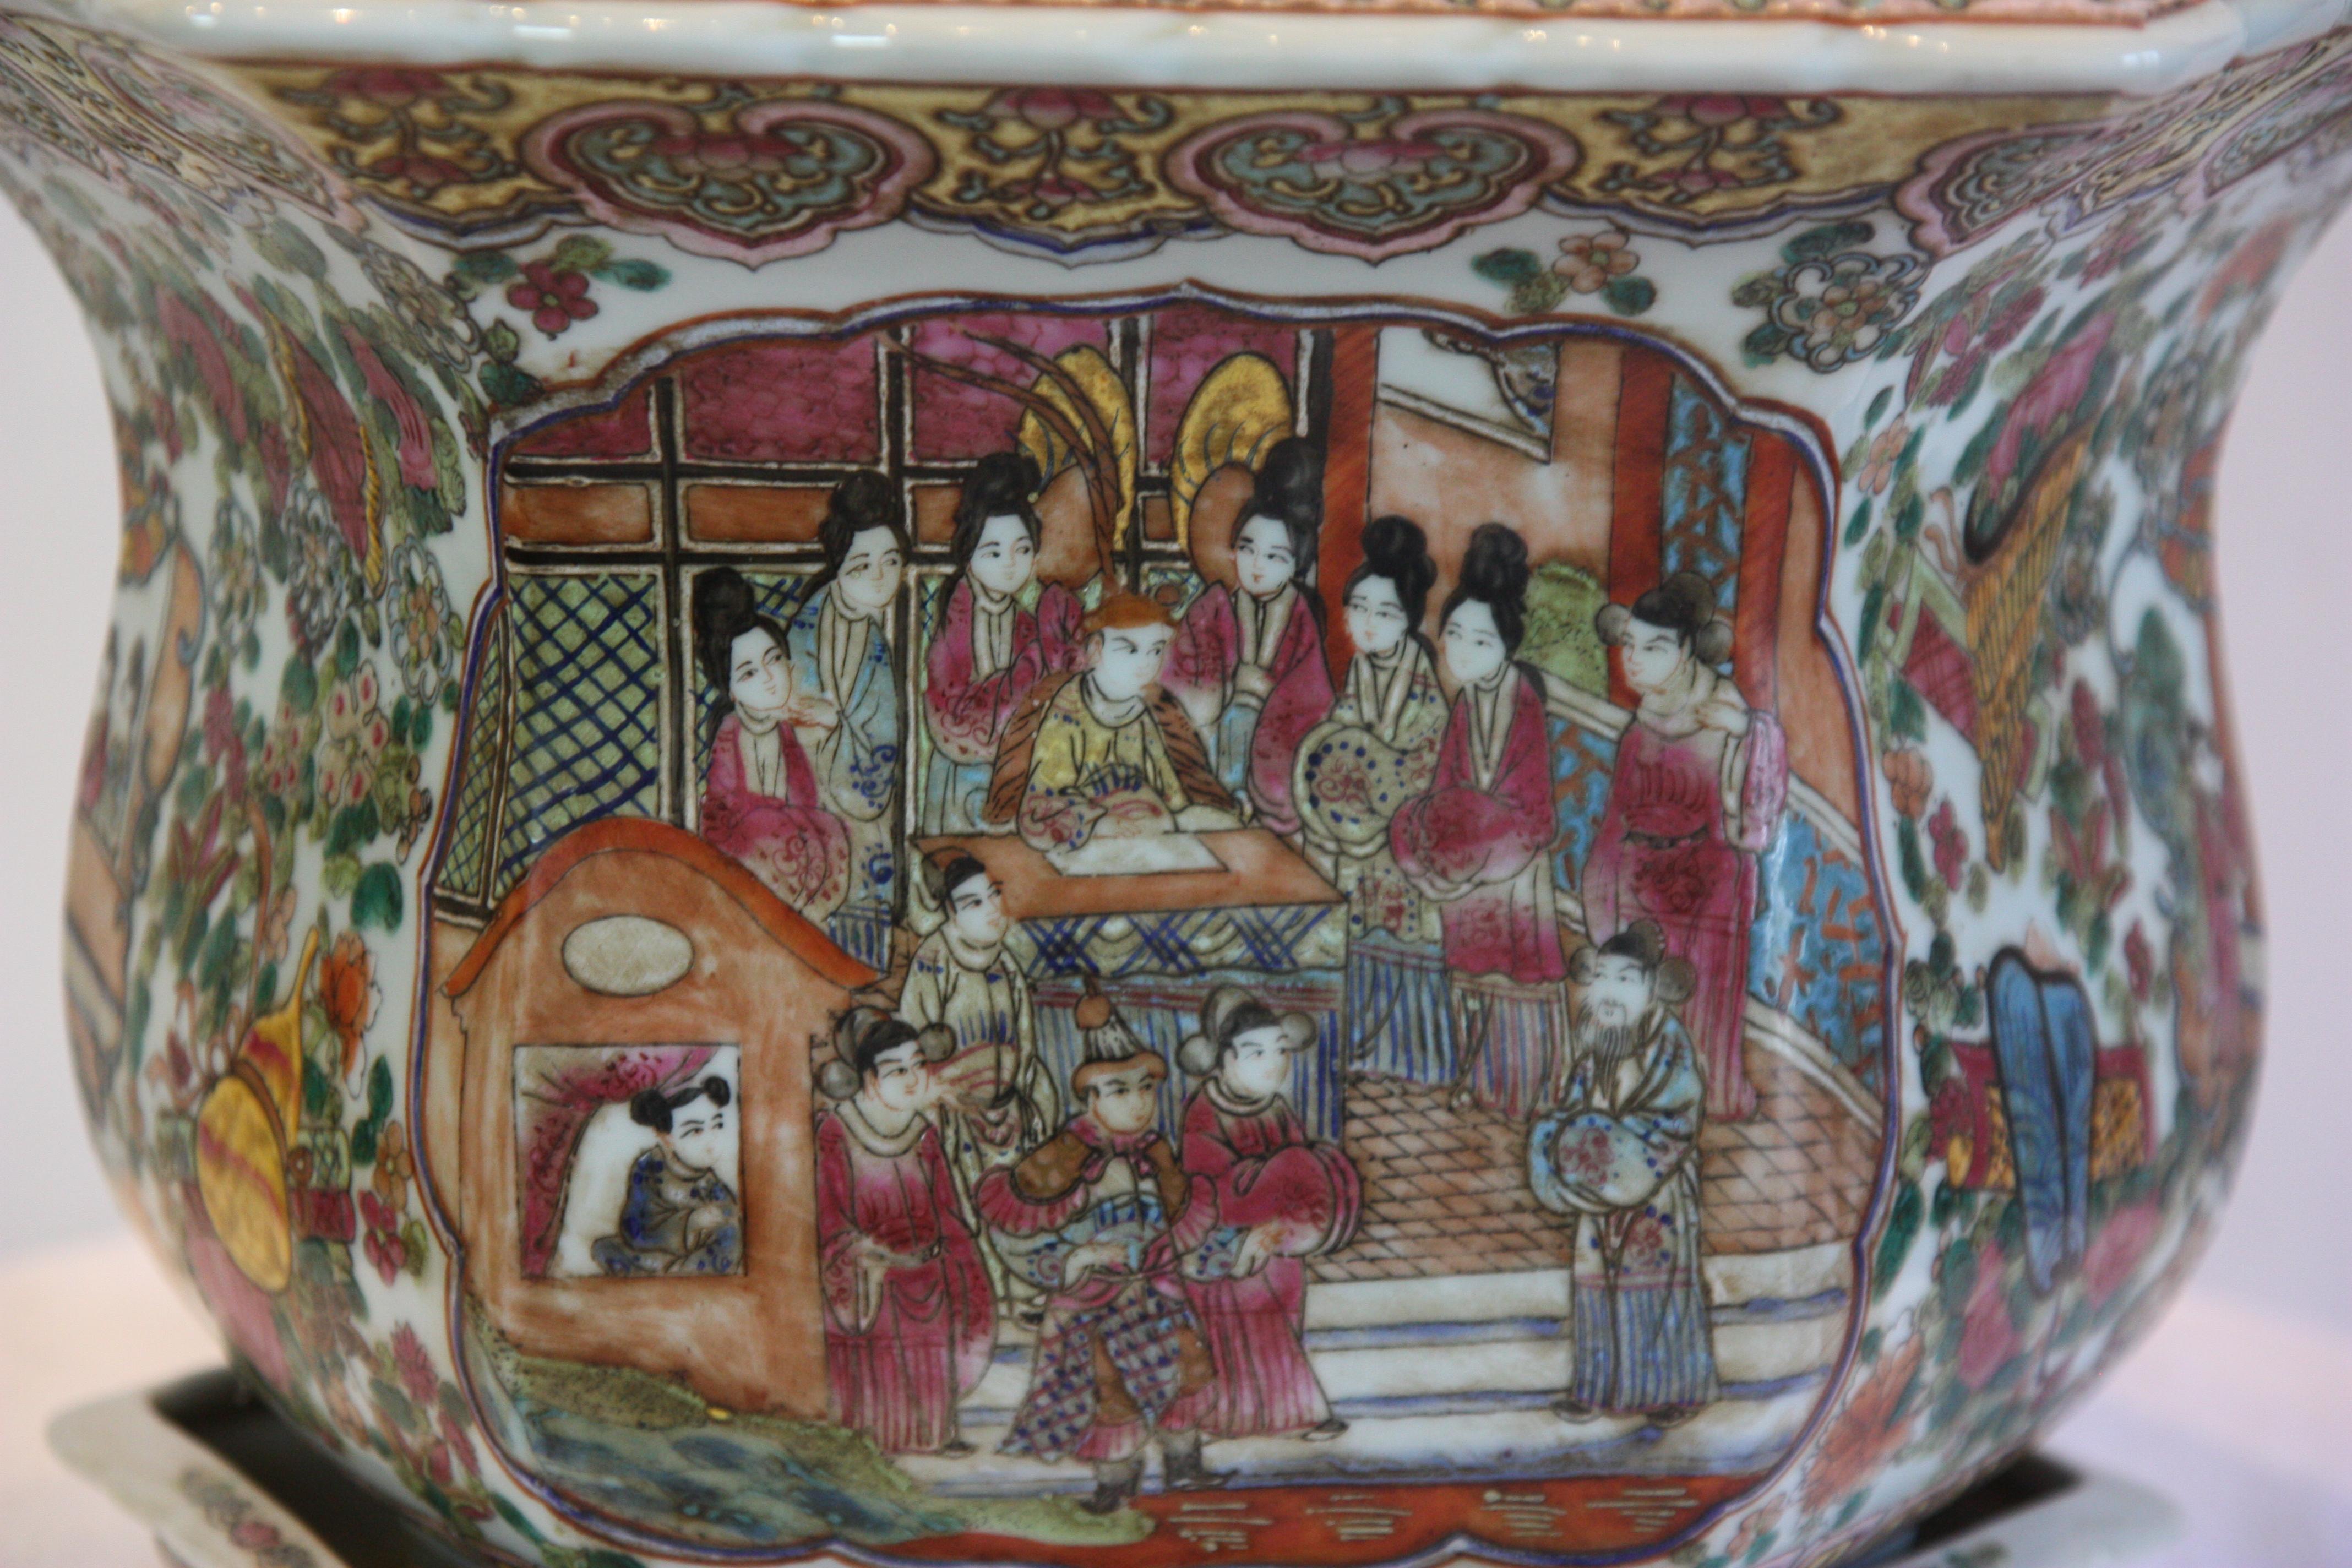 Hand-painted octagonal jardinière with plate. Images of a royal scene, flowers and animals adorn the piece.